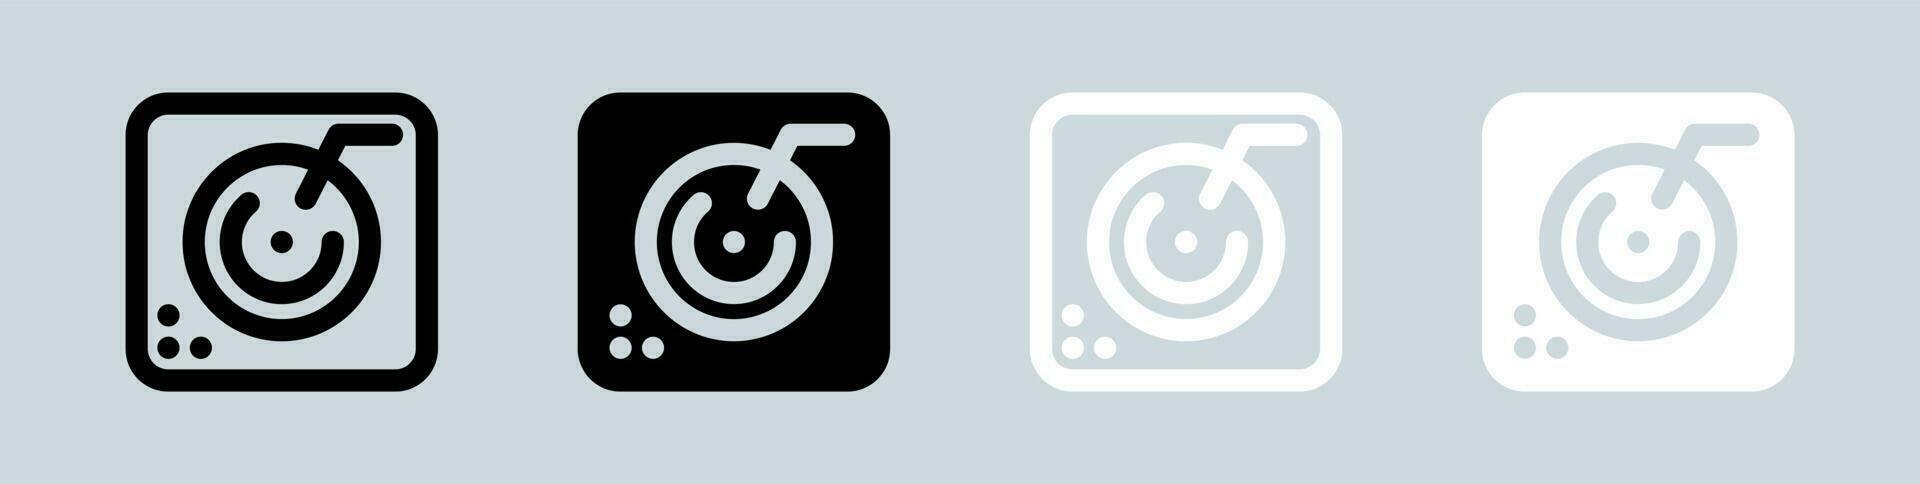 Turntable icon set in black and white. Dj signs vector illustration.